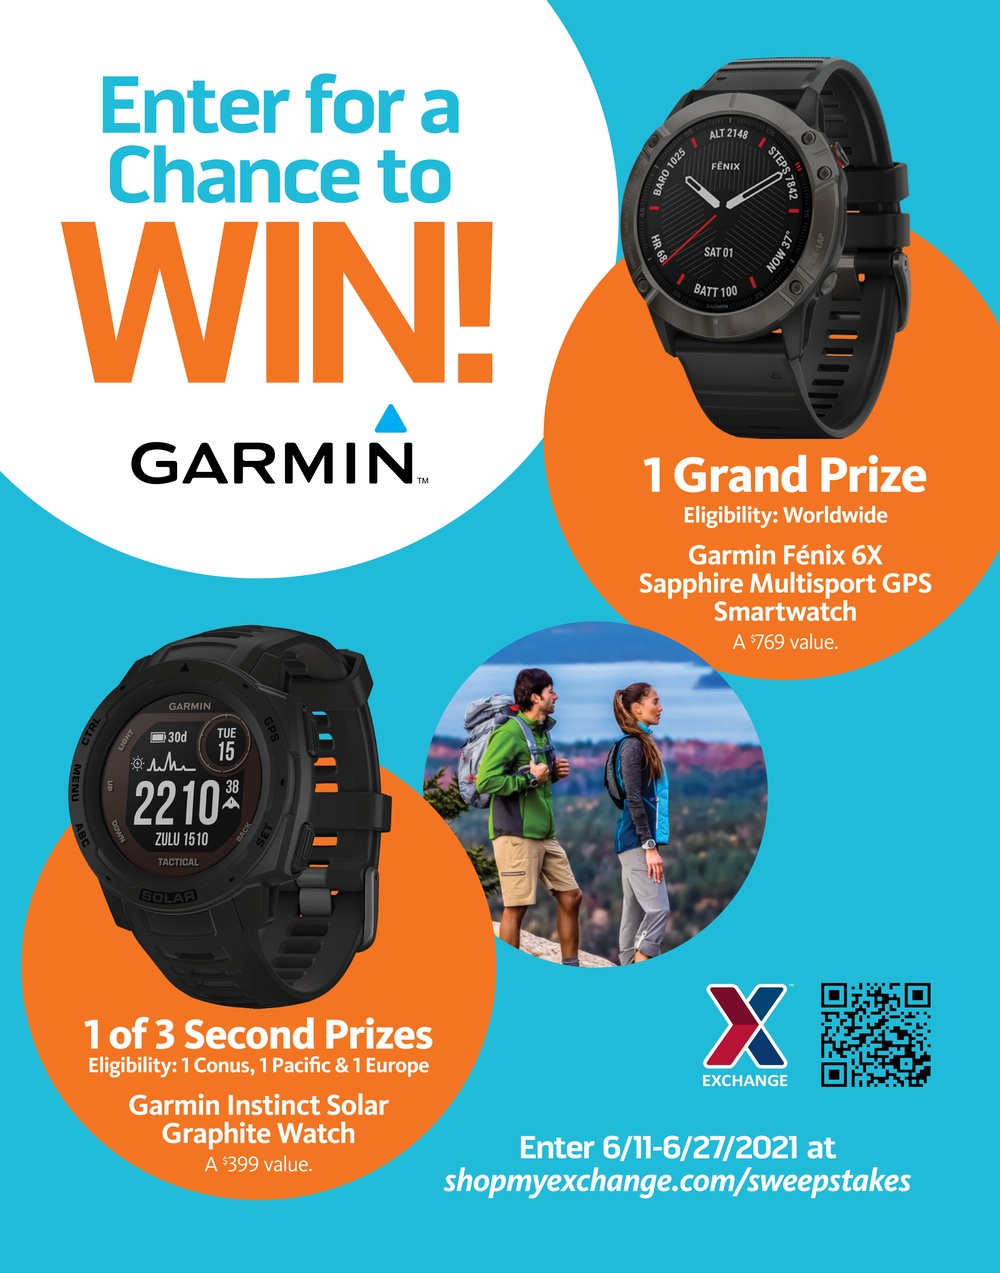 Military Shoppers Can Win Garmin Watches in Exchange Sweepstakes